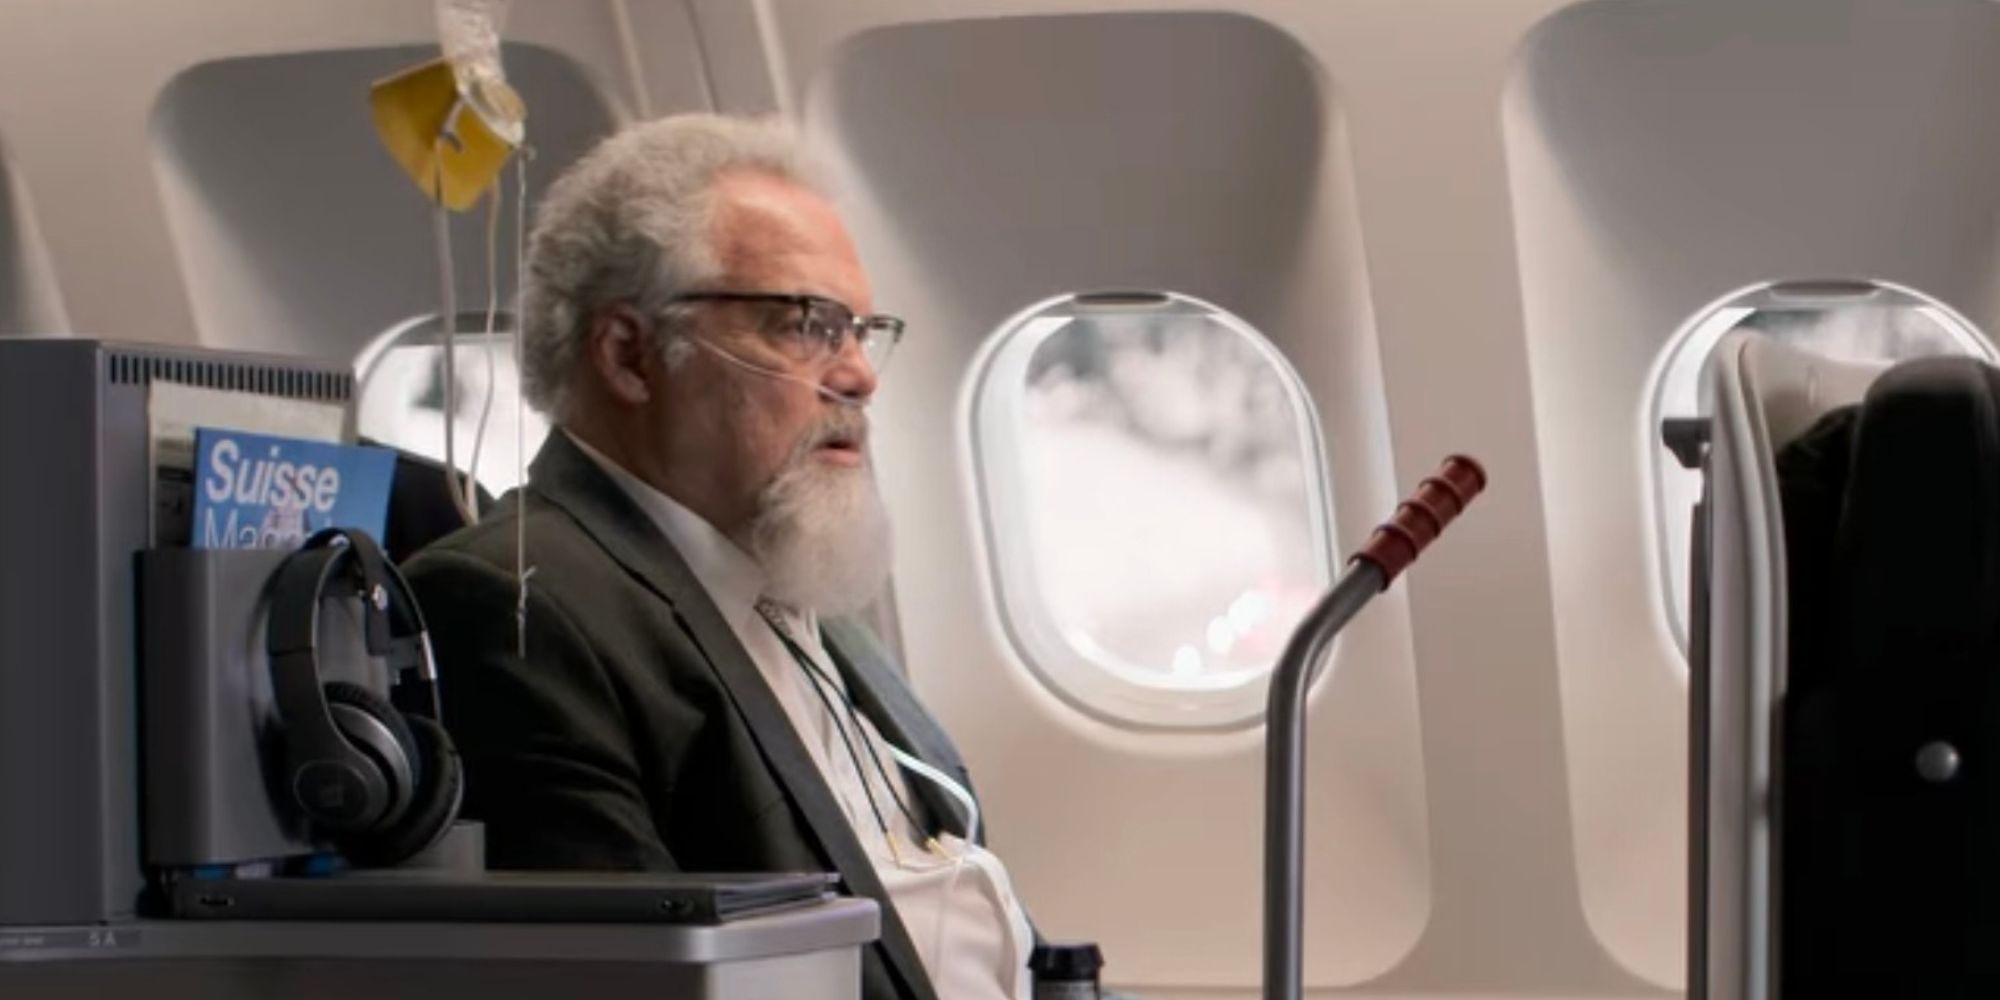 Vincent D'Onofrio dressed as an old man and sitting on a plane in Lift